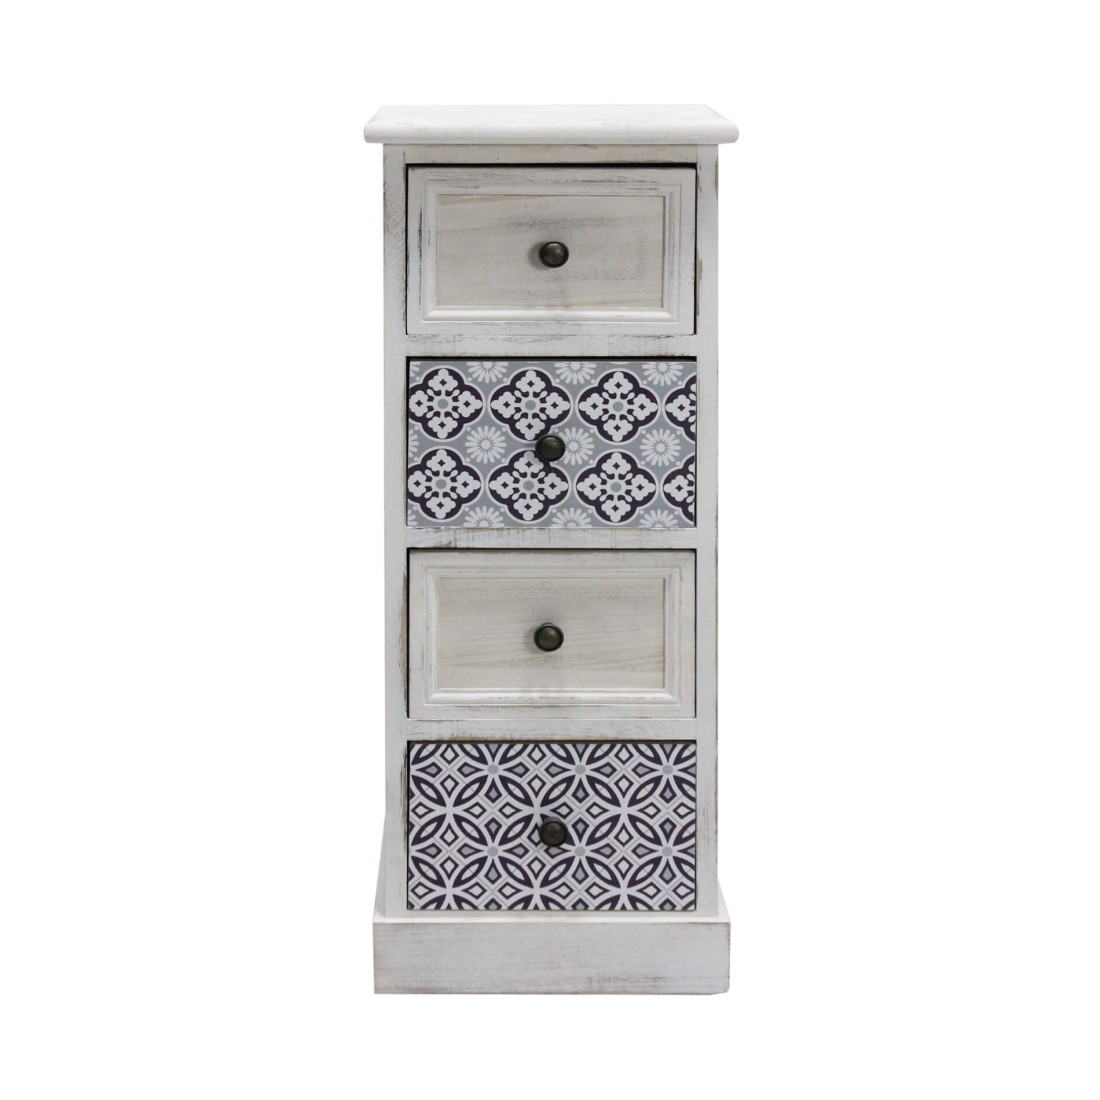 Chest of drawers with 4 white drawers in classic style